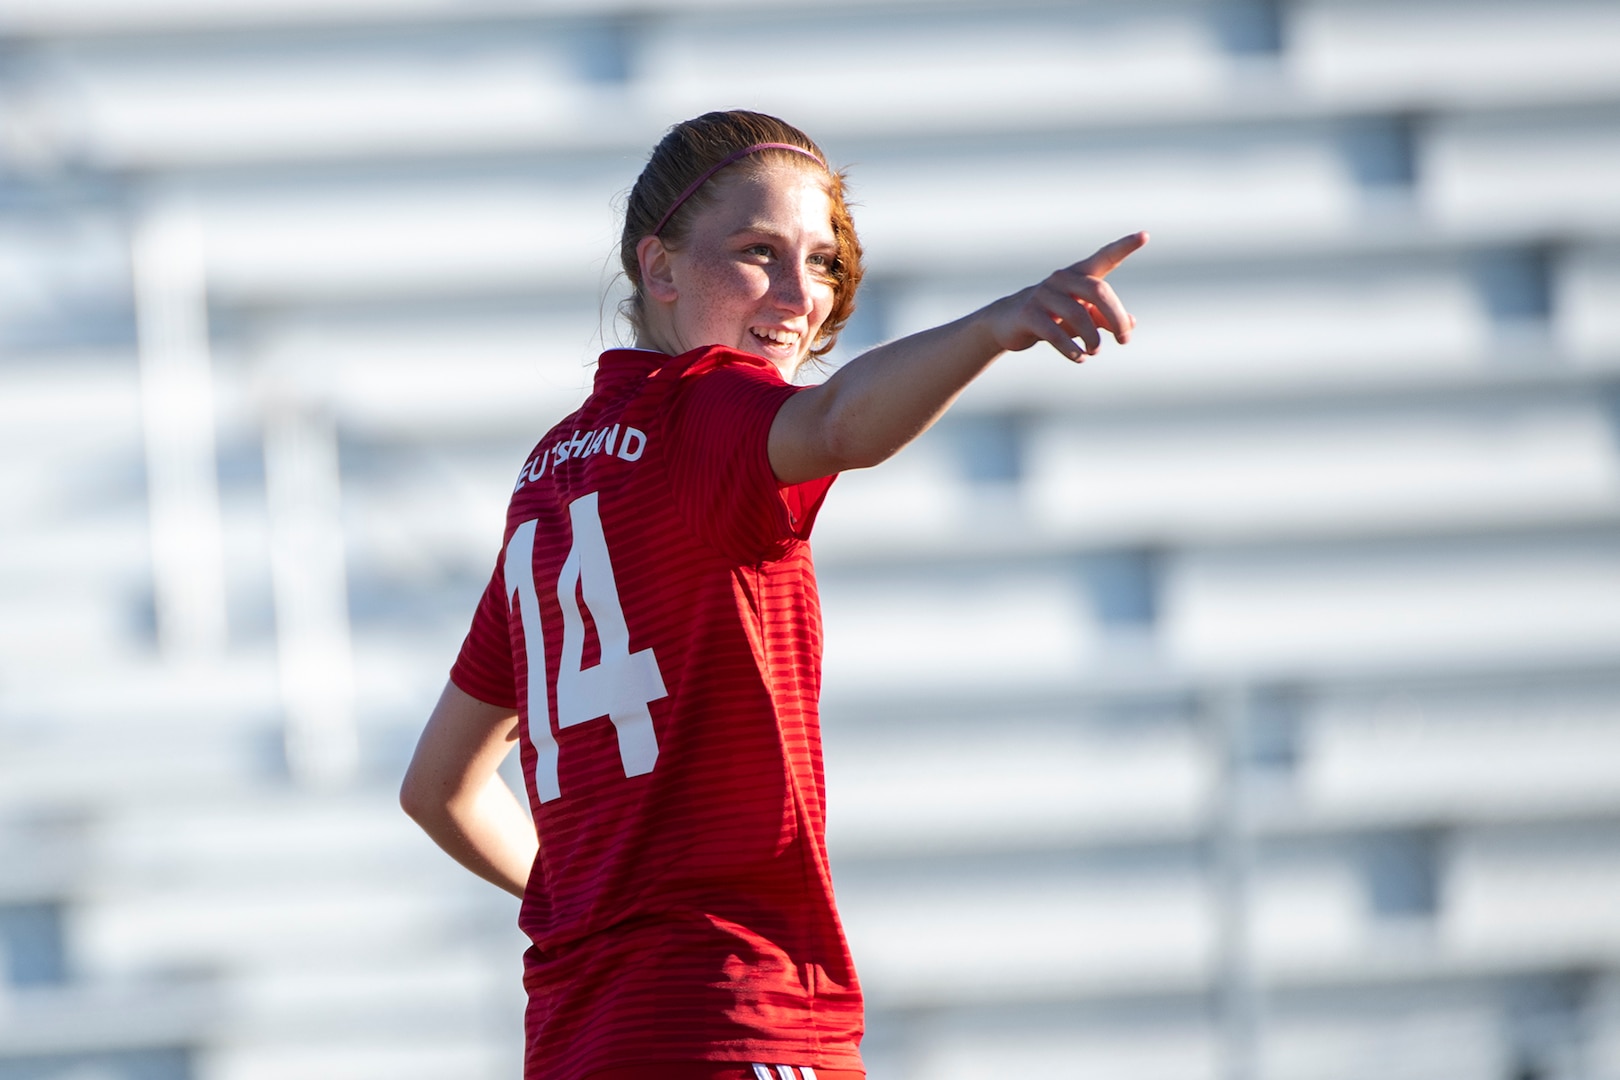 Germany’s OR-4 Sonja Bartoshek reacts to scoring her first of two goals during the second round of opening night for the  13th CISM (International Military Sports Council) World Military Women’s Football Championship in Meade, Washington July 11, 2022.  Germany beat Ireland 3-0. (DoD photo by EJ Hersom)